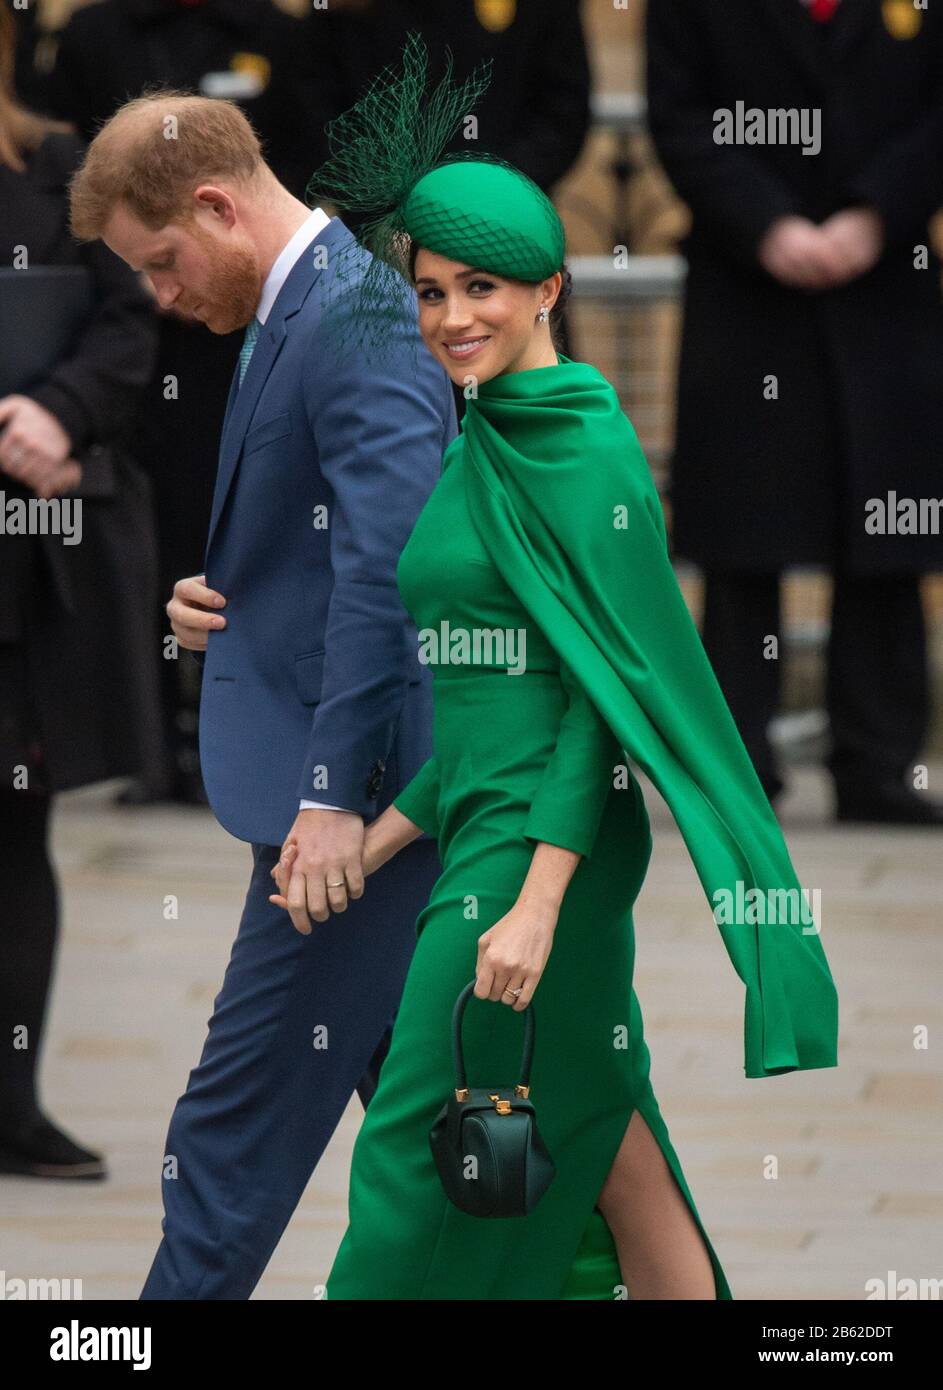 The Duke and Duchess of Sussex arrive at the Commonwealth Service at Westminster Abbey, London on Commonwealth Day. The service is their final official engagement before they quit royal life. PA Photo. Picture date: Monday March 9, 2020. See PA story ROYAL Commonwealth. Photo credit should read: Dominic Lipinski/PA Wire Stock Photo